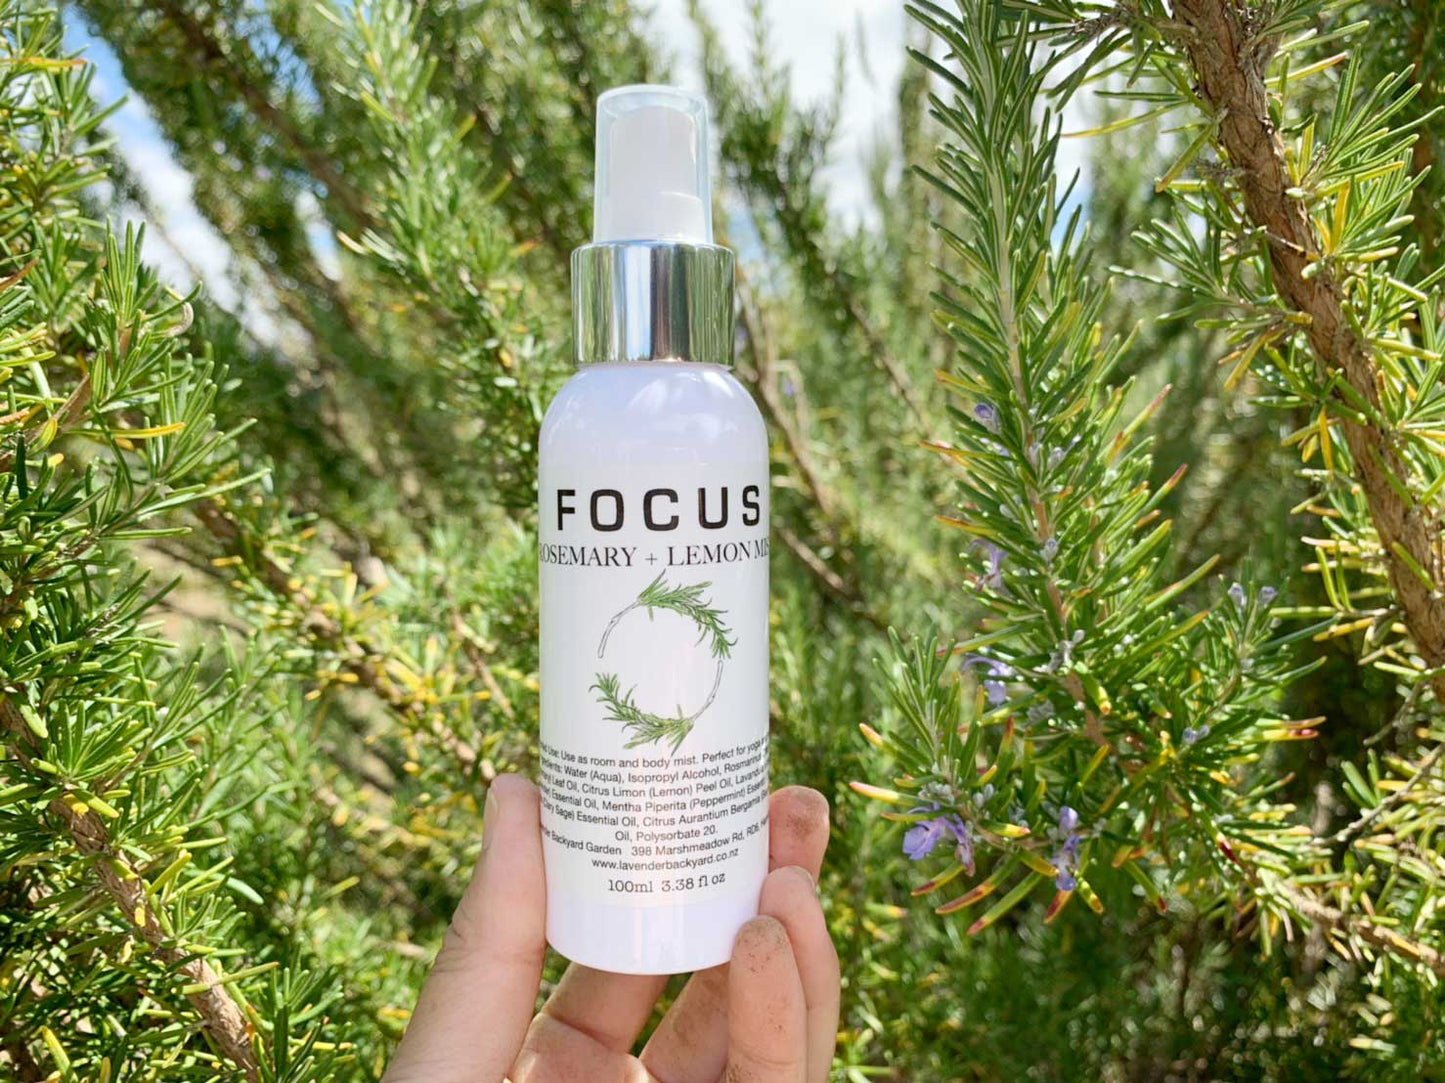 Focus Mist - Help Concentration scented by essential oils, lavender product from NZ Lavender Farm